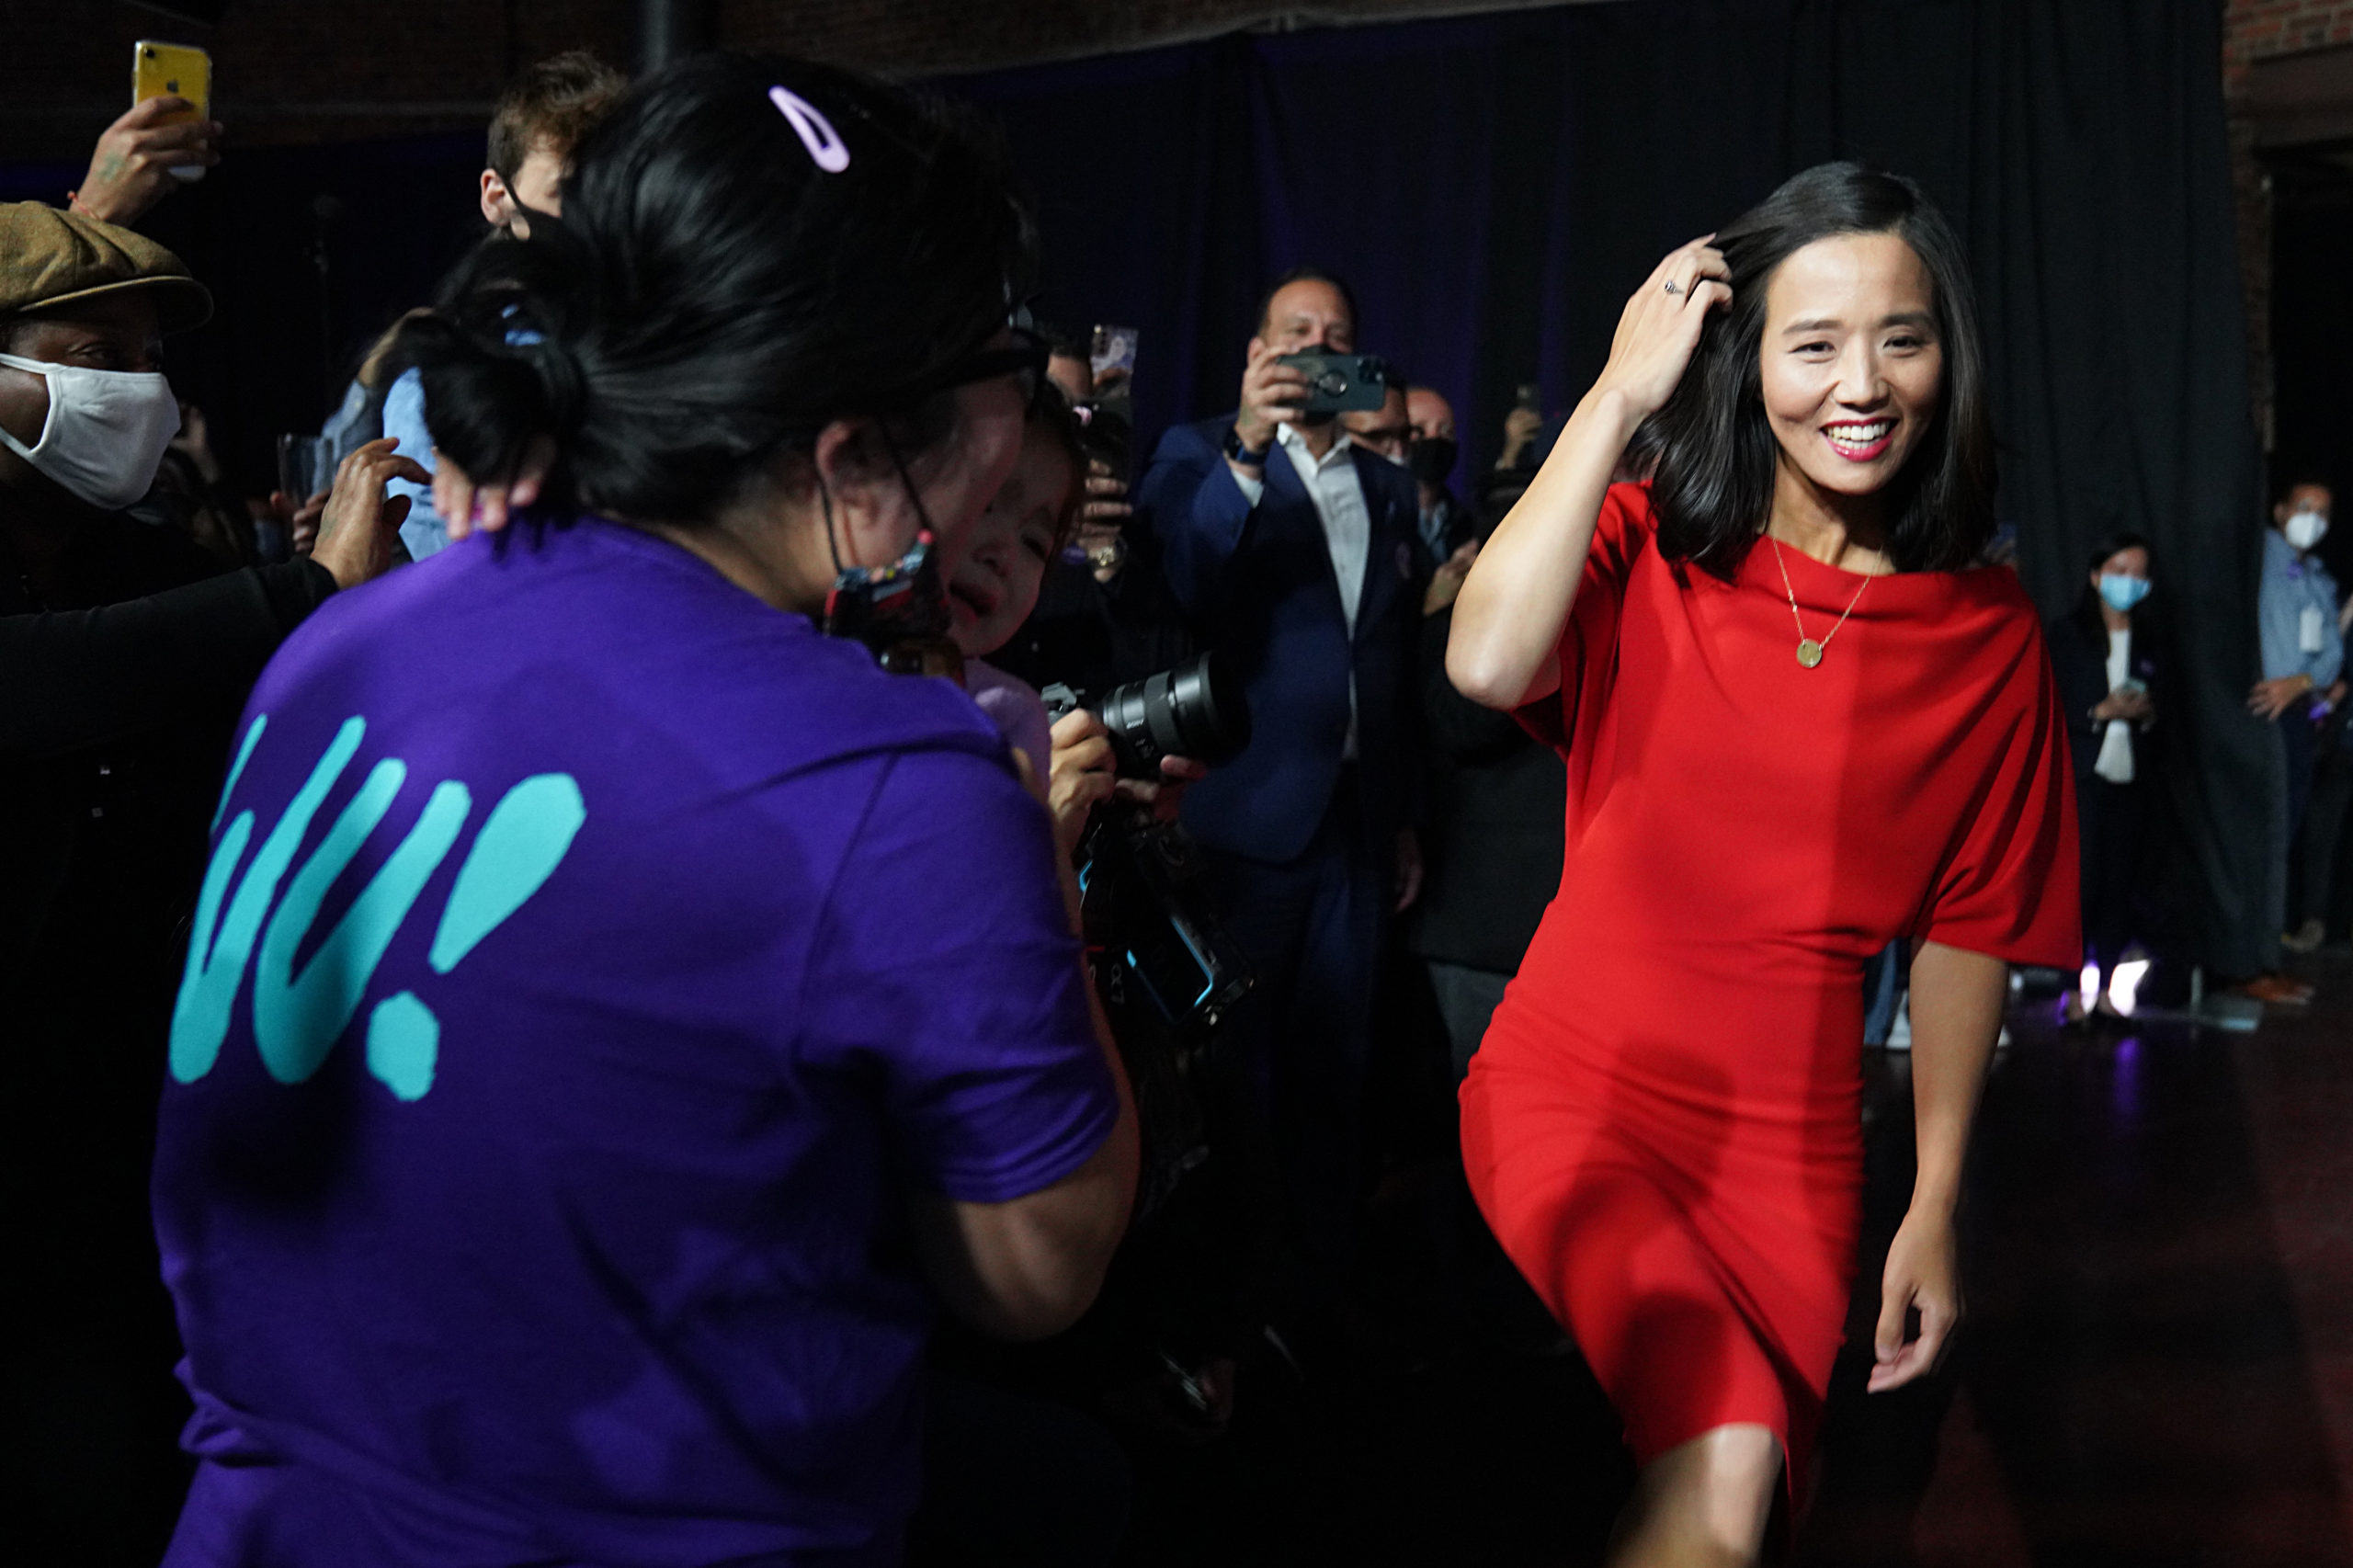 Michelle Wu greets supporters as she arrives at an election night event on Nov. 2 in Boston, Massachusetts. (Allison Dinner/Getty Images)